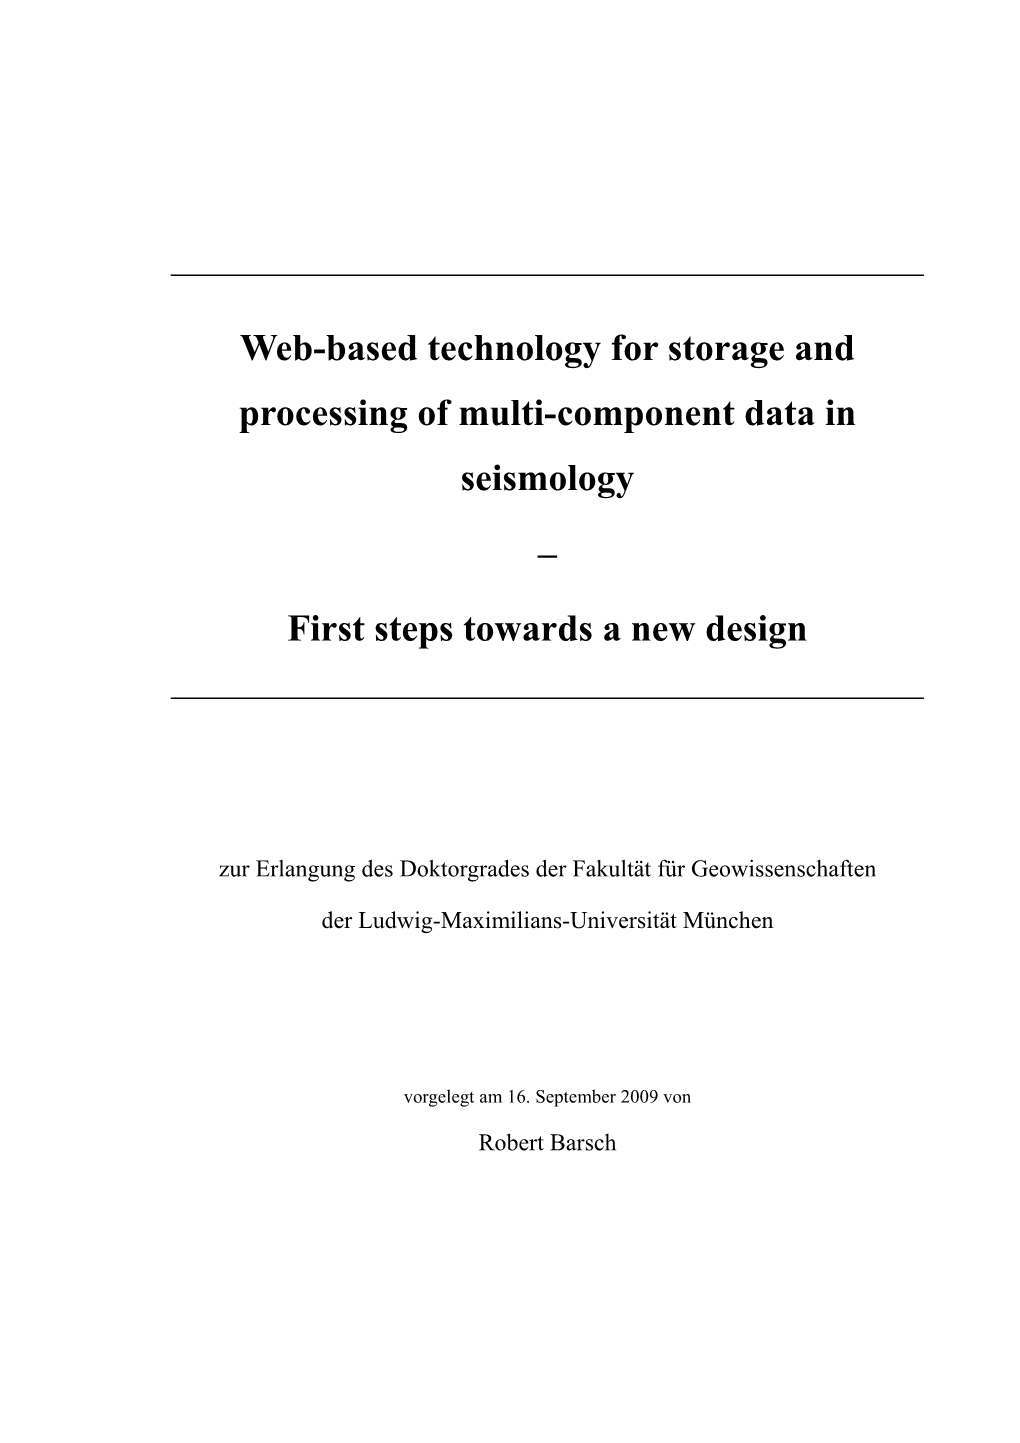 Web-Based Technology for Storage and Processing of Multi-Component Data in Seismology – First Steps Towards a New Design